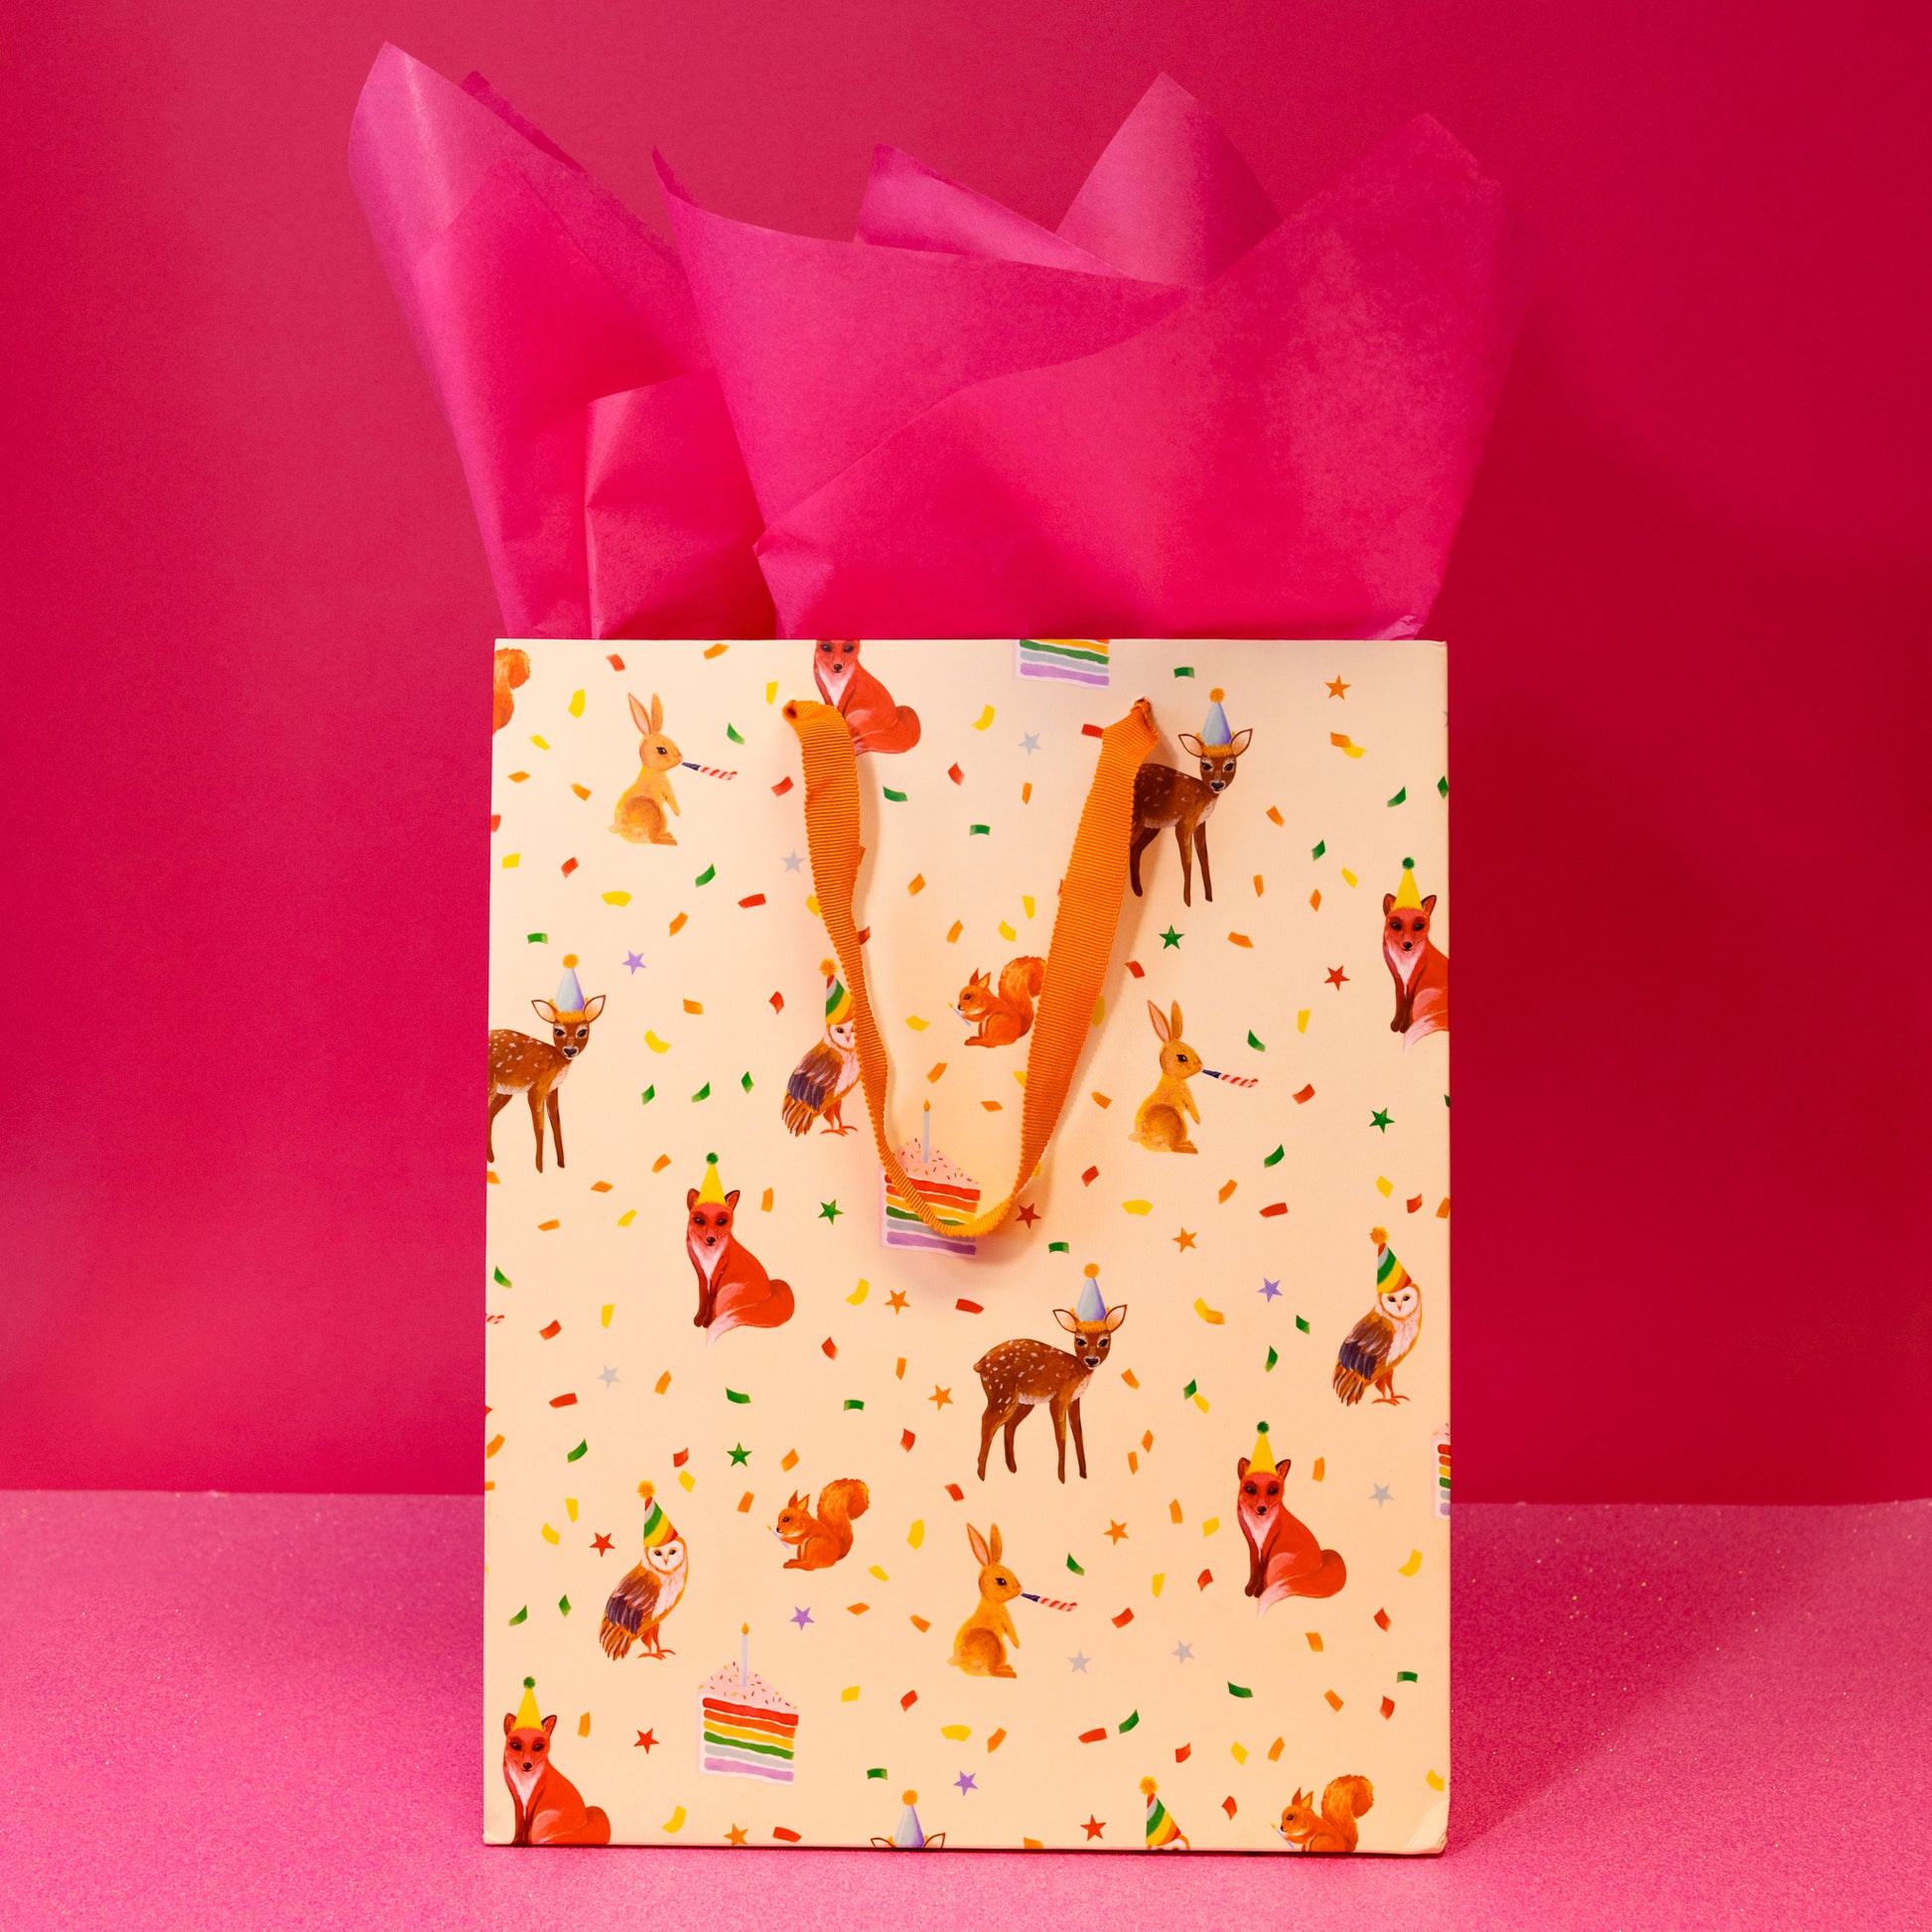 beige bag with animals and confetti